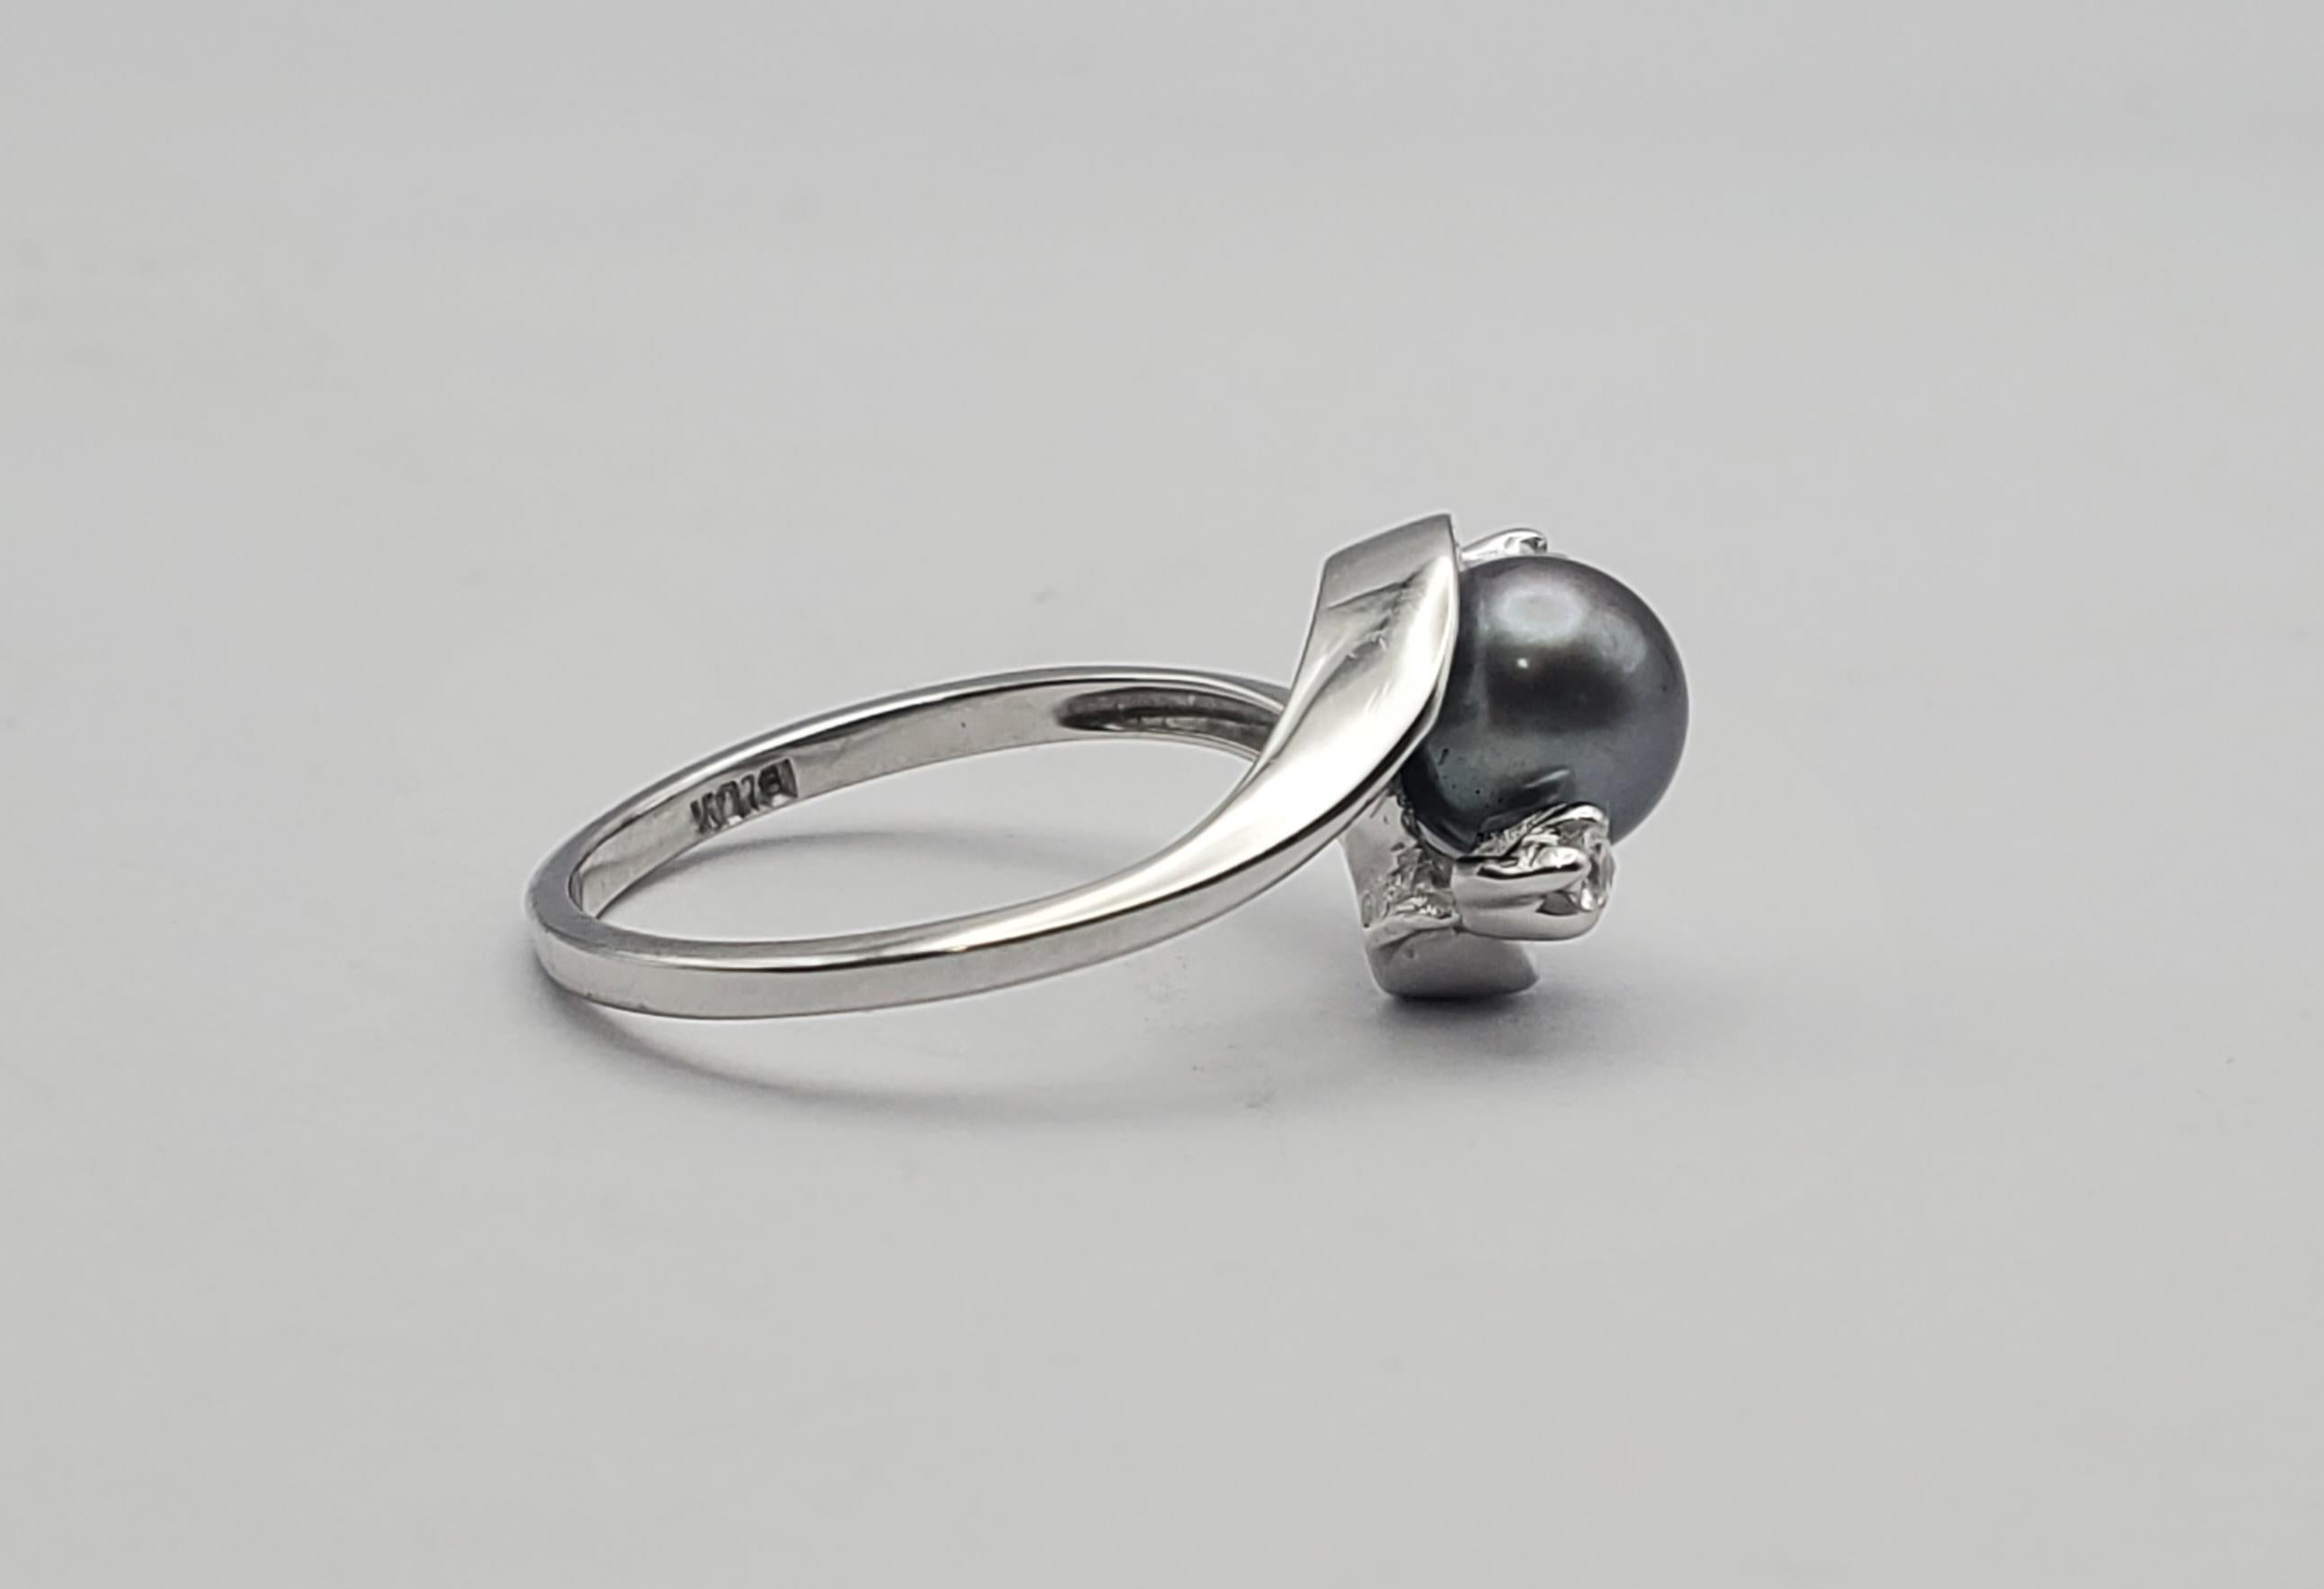 Stunning Tahitian pearl and diamond ring. The pearl has an smoky grey color with undertones of purple and green. The design of the ring is a bypass style with the sides of the pearl protected by two curves of gold, each tipped with a single round